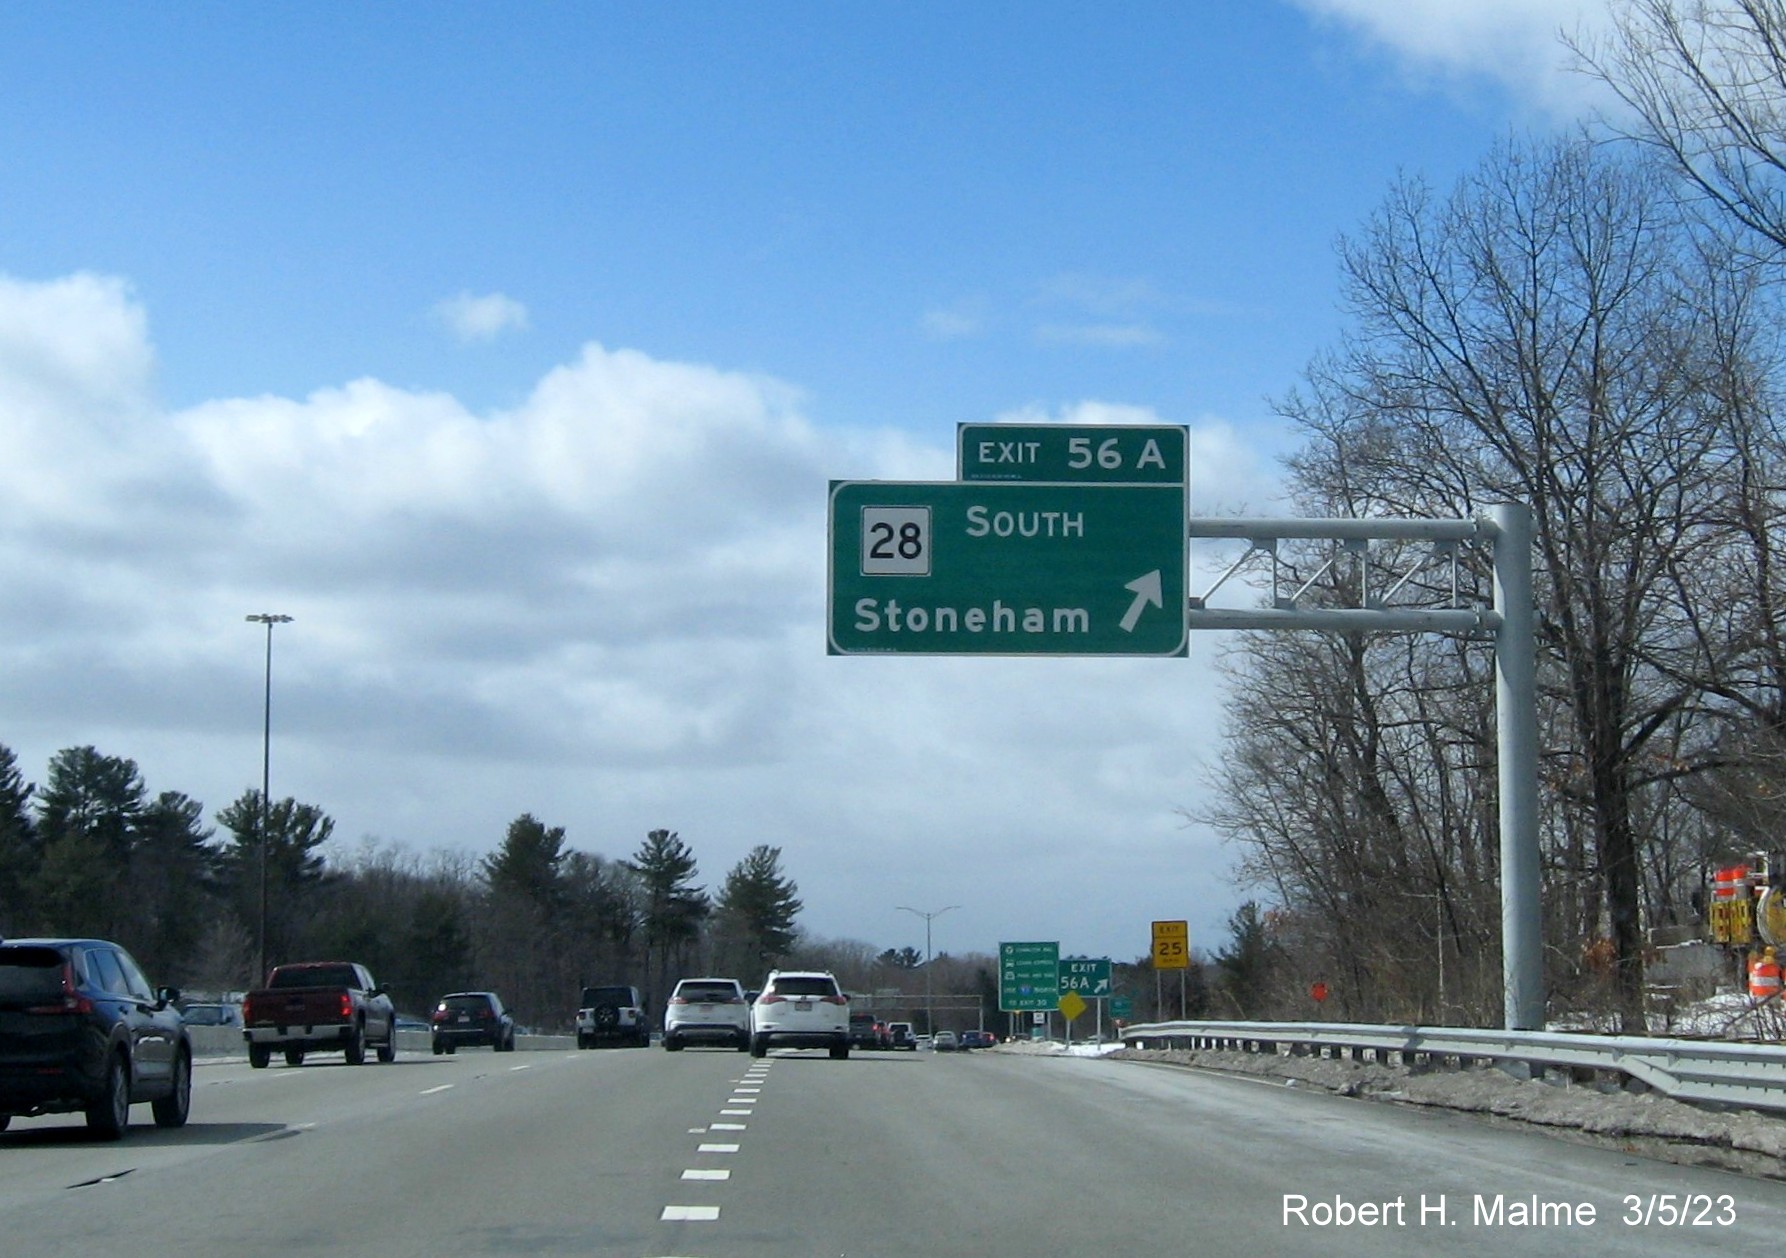 Image of recently placed overhead ramp sign for MA 28 South exit on I-95/MA 128 South in Reading, March 2023